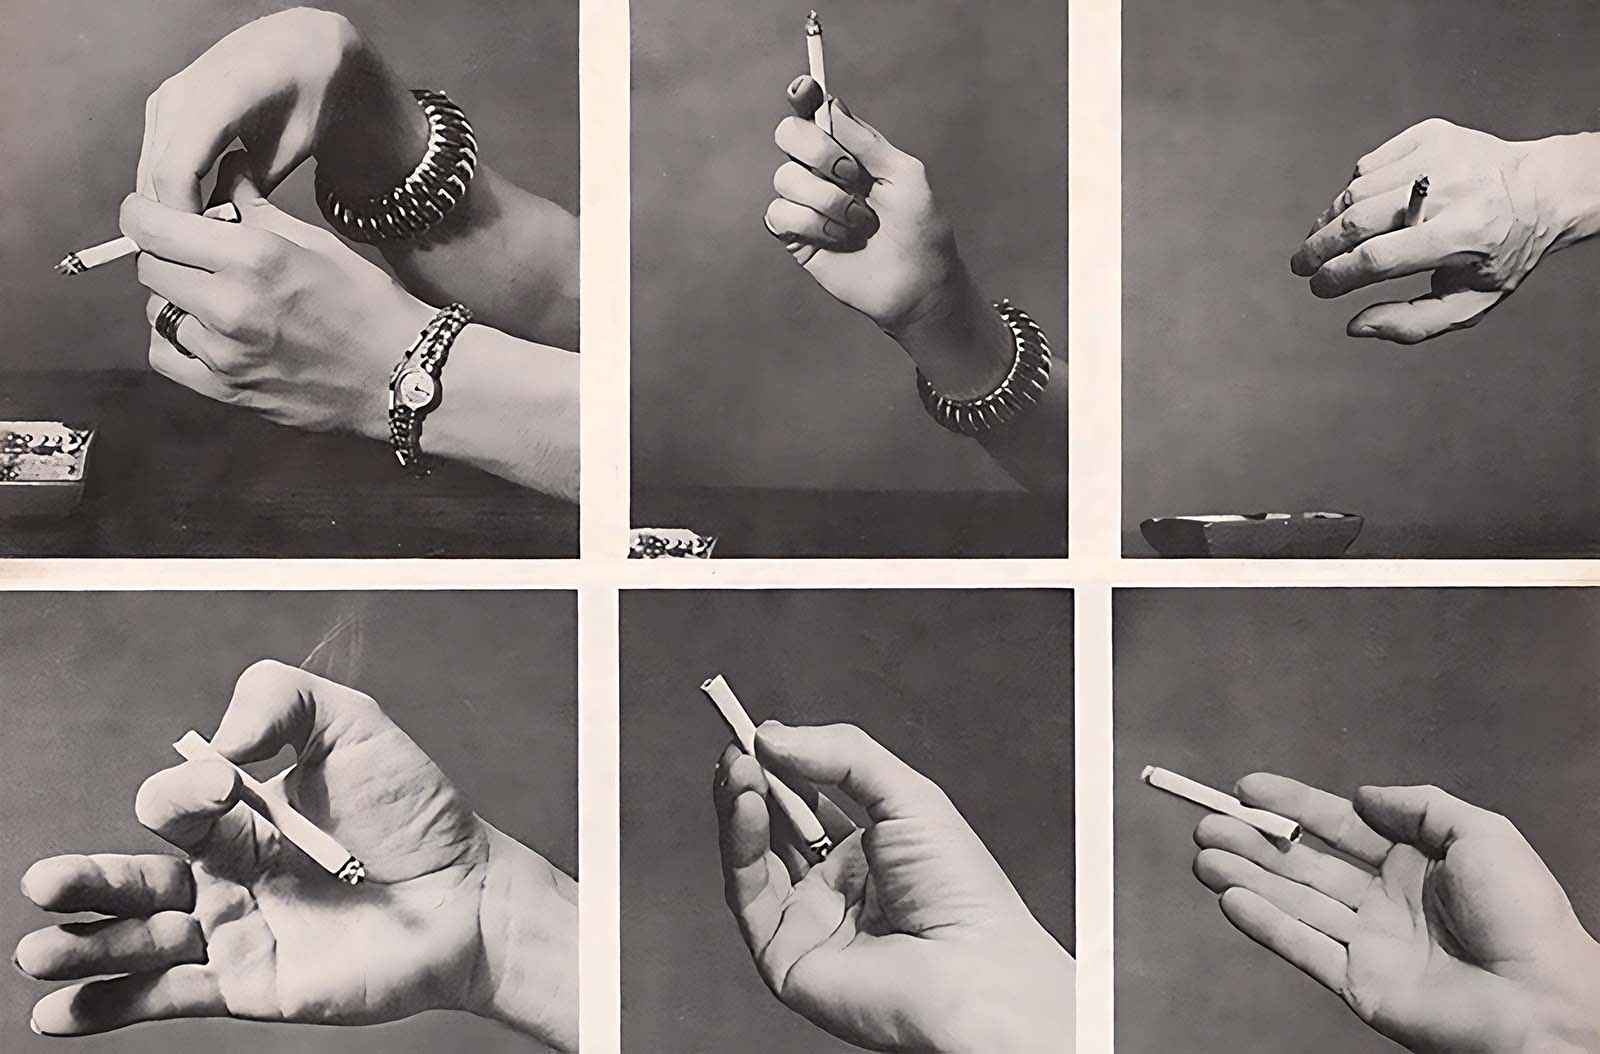 The 1950s Cigarette Psychology: 9 Ways of Holding Your Cigarette and Their Meaning